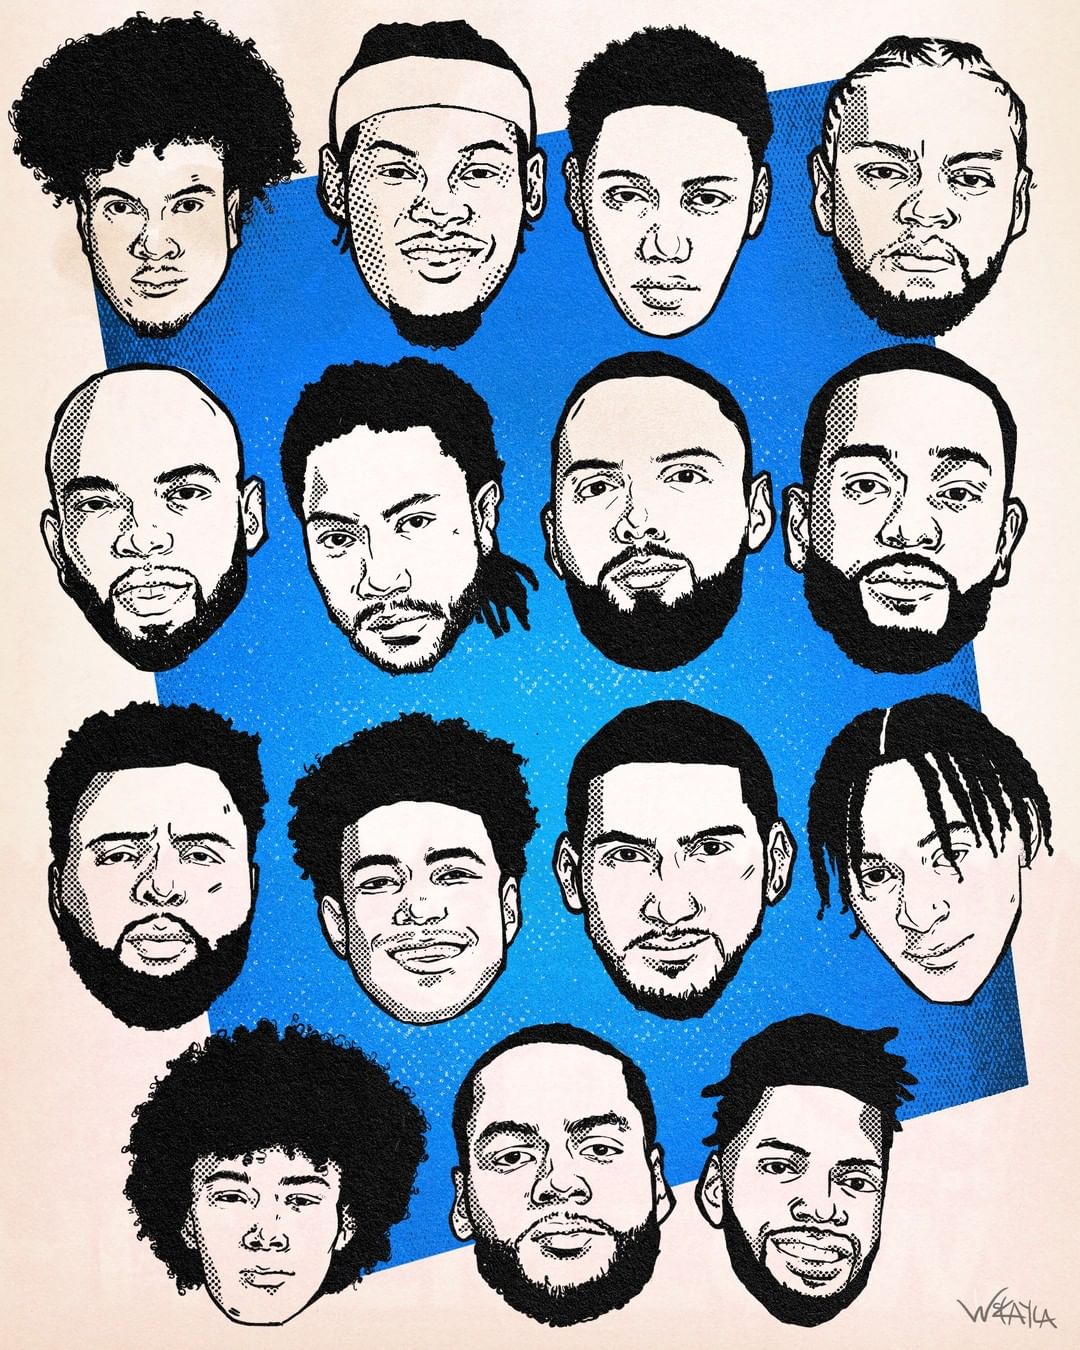 The many faces of your New York Knicks  #KnicksArtFriday...